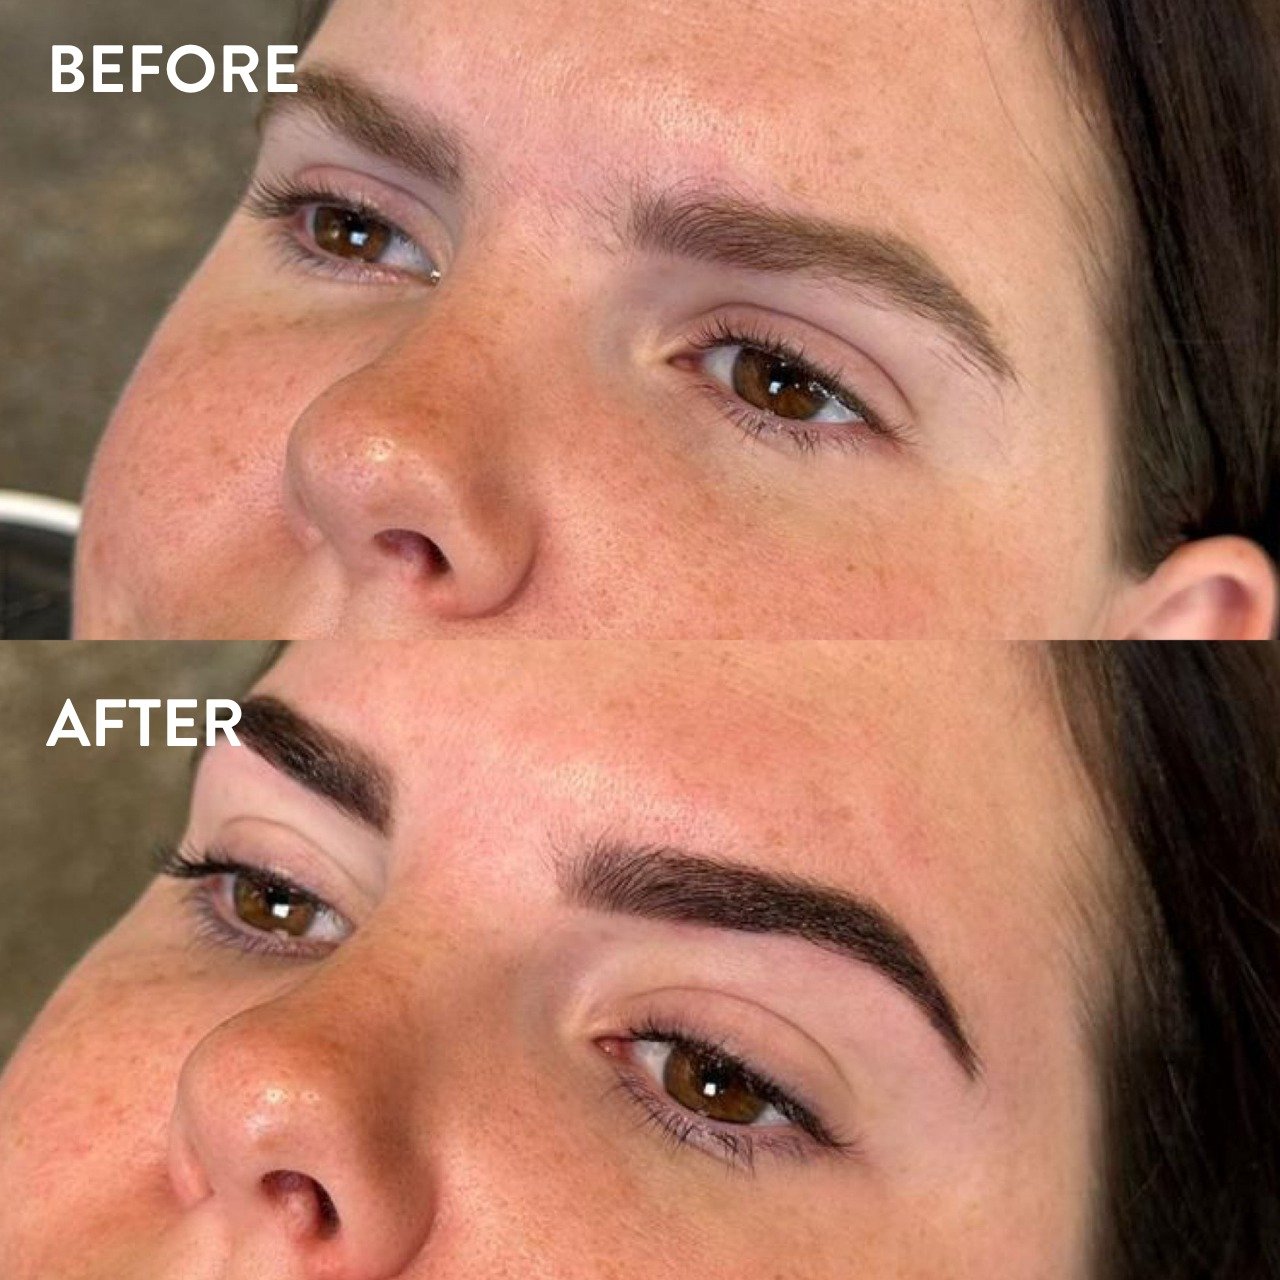 Brow shape, stain and lash colour by Marimar.

Getting a brow shape and stain and lash colour can enhance the appearance of your brows by defining their shape and adding colour. It helps frame your eyes and overall look.